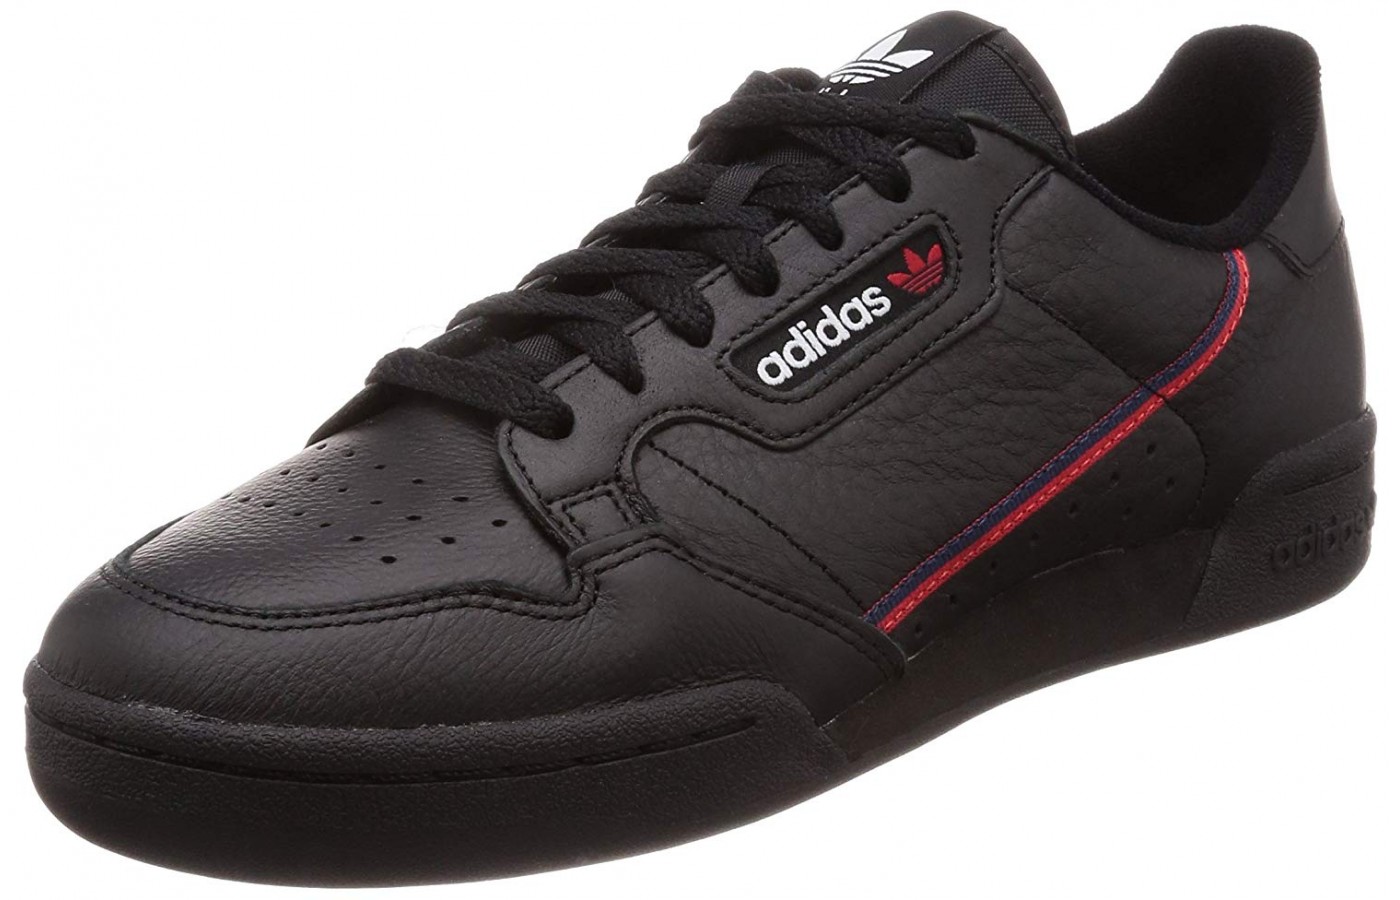 Adidas Continental 80 Reviewed for 